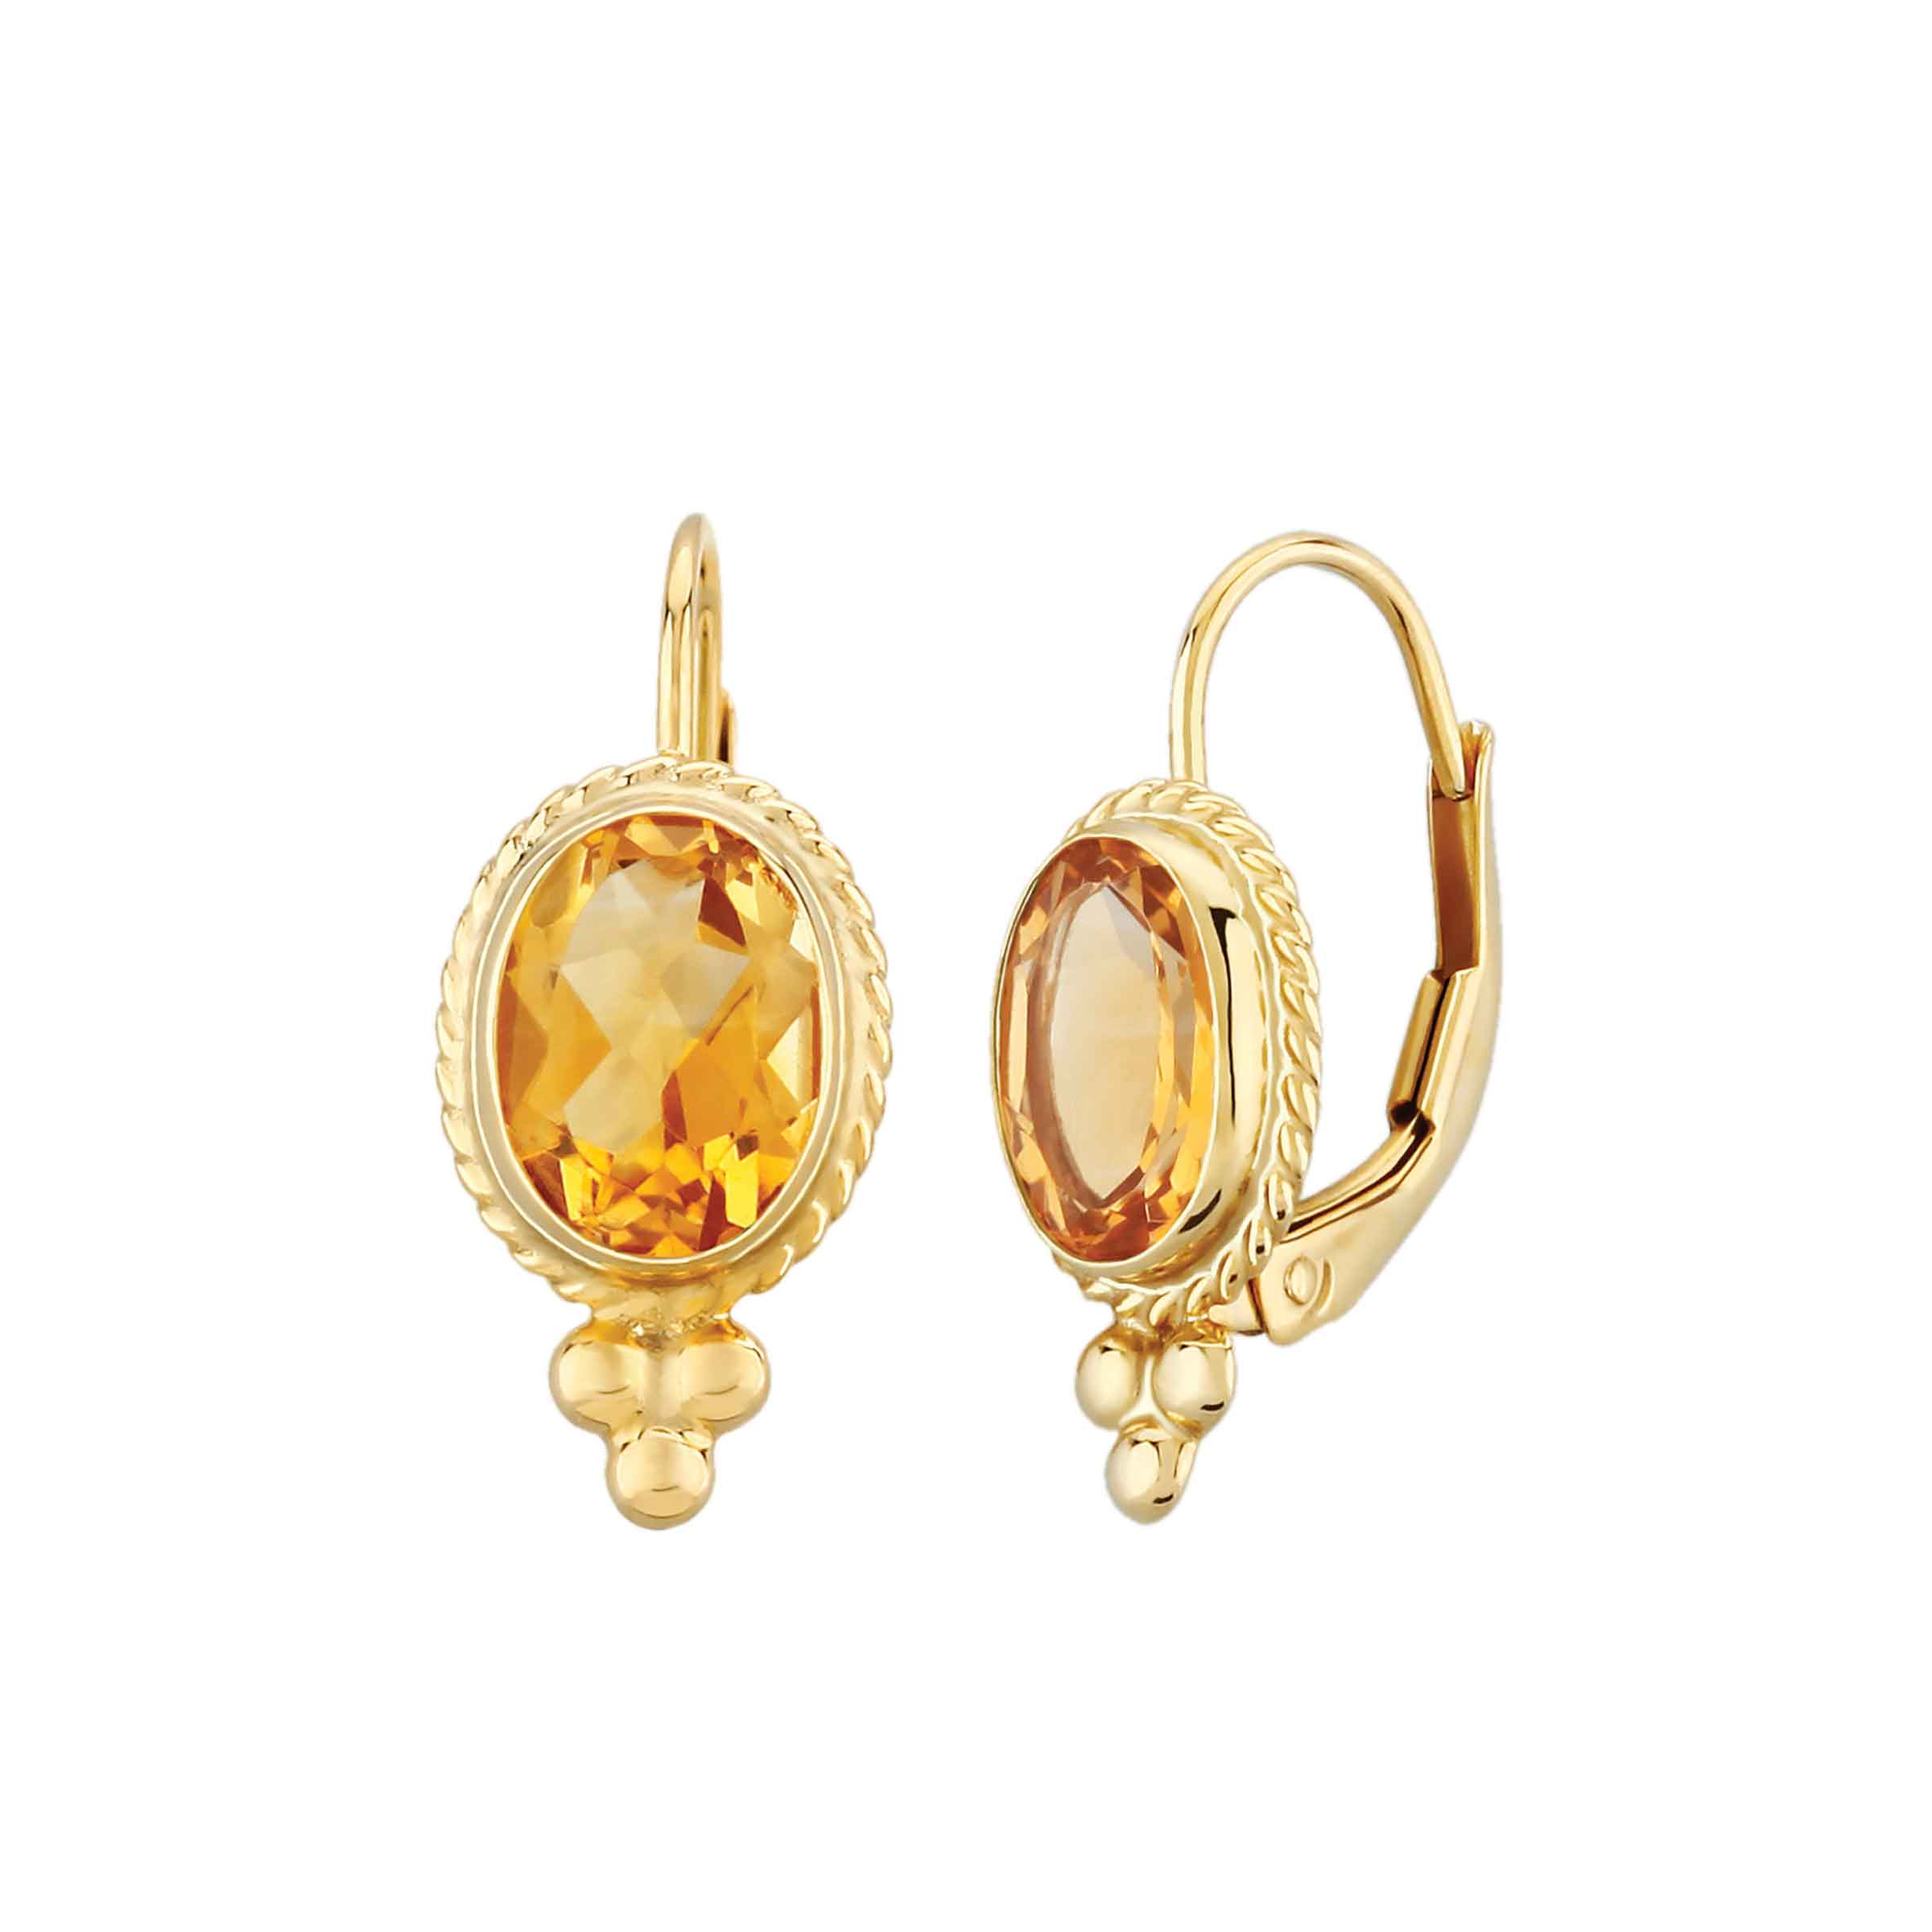 Aggregate more than 180 oval citrine earrings